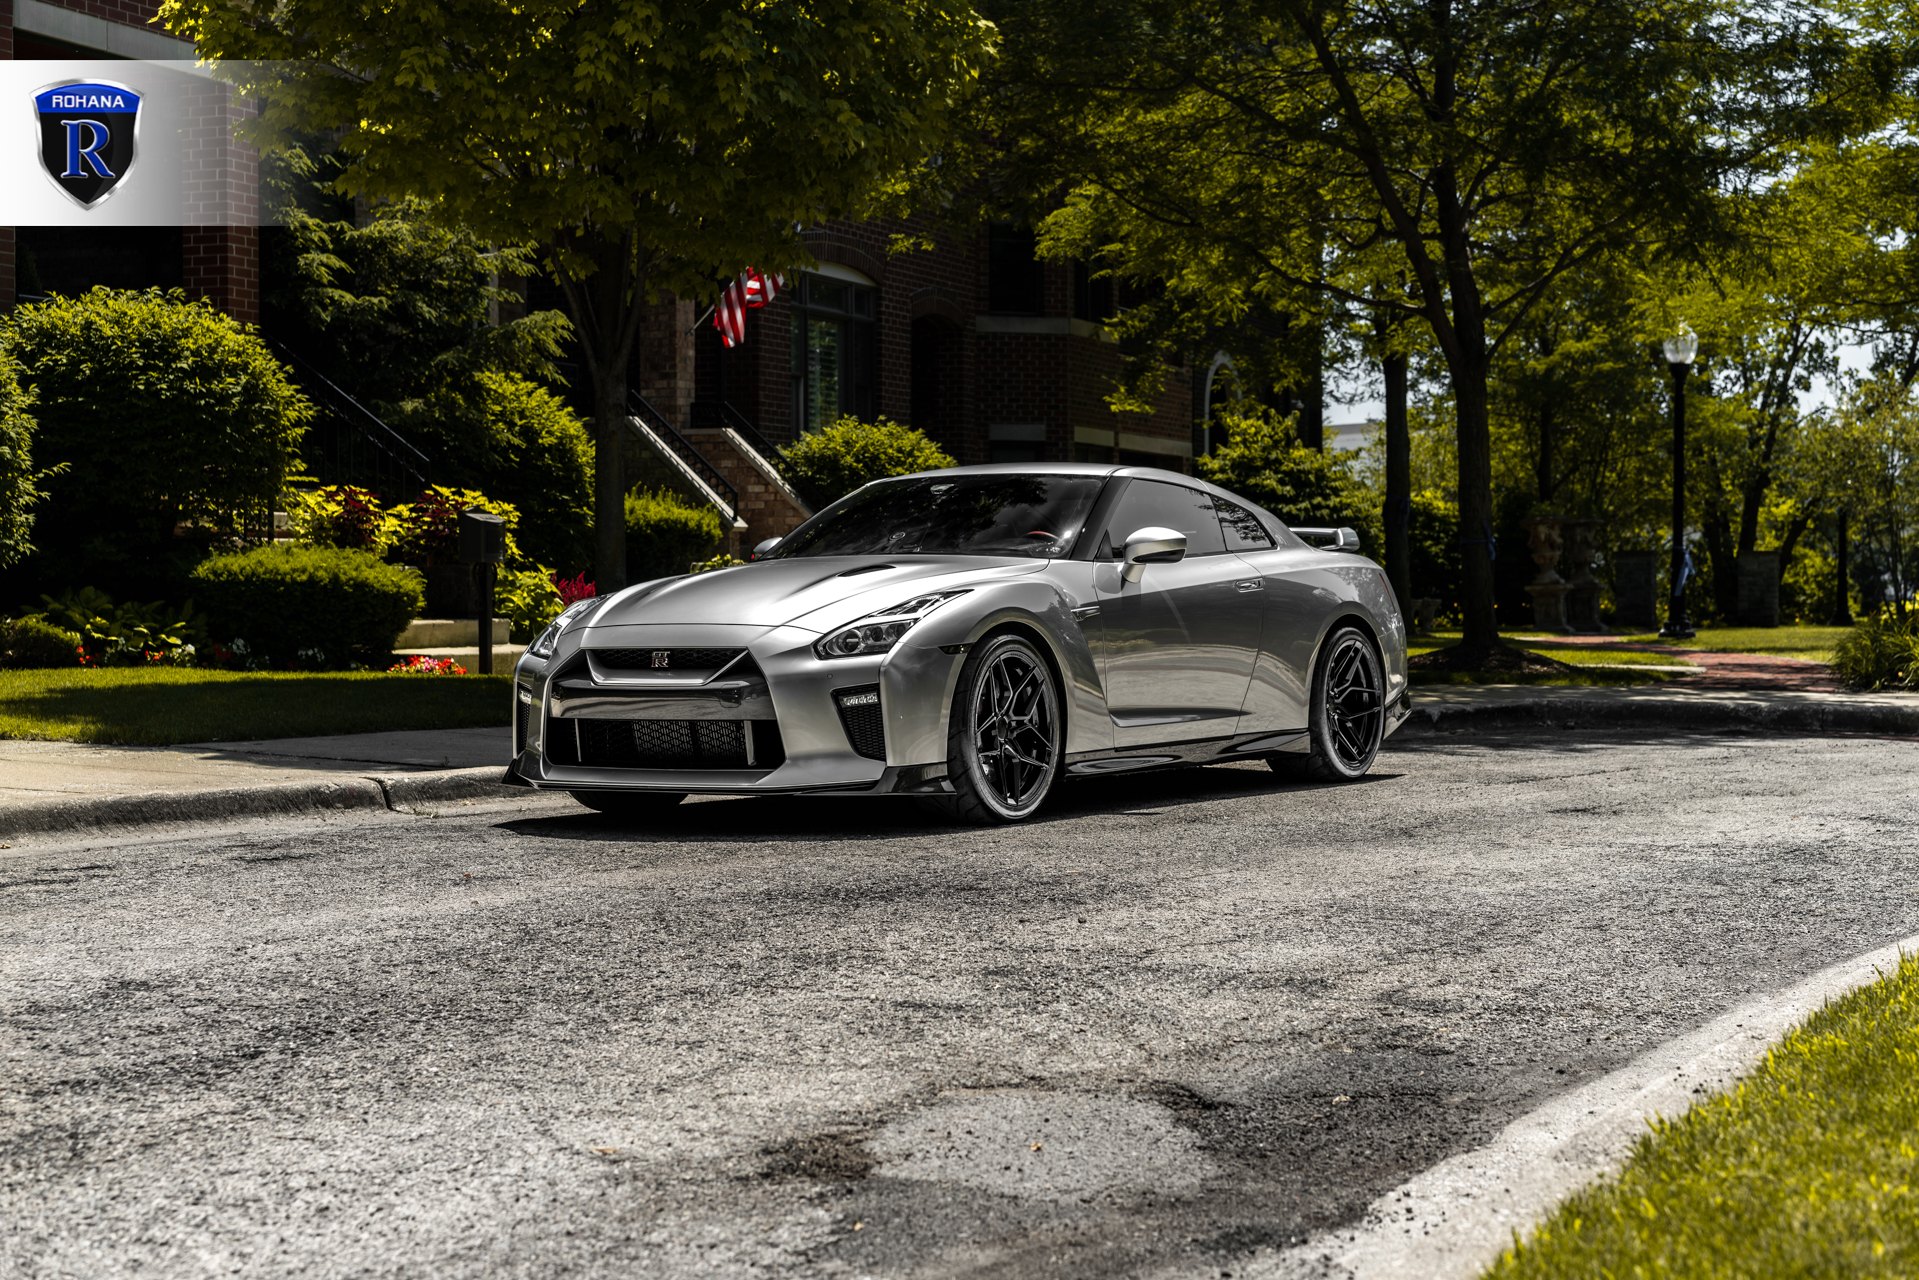 Aftermarket Front Bumper on Silver Nissan GT-R - Photo by Rohana Wheels